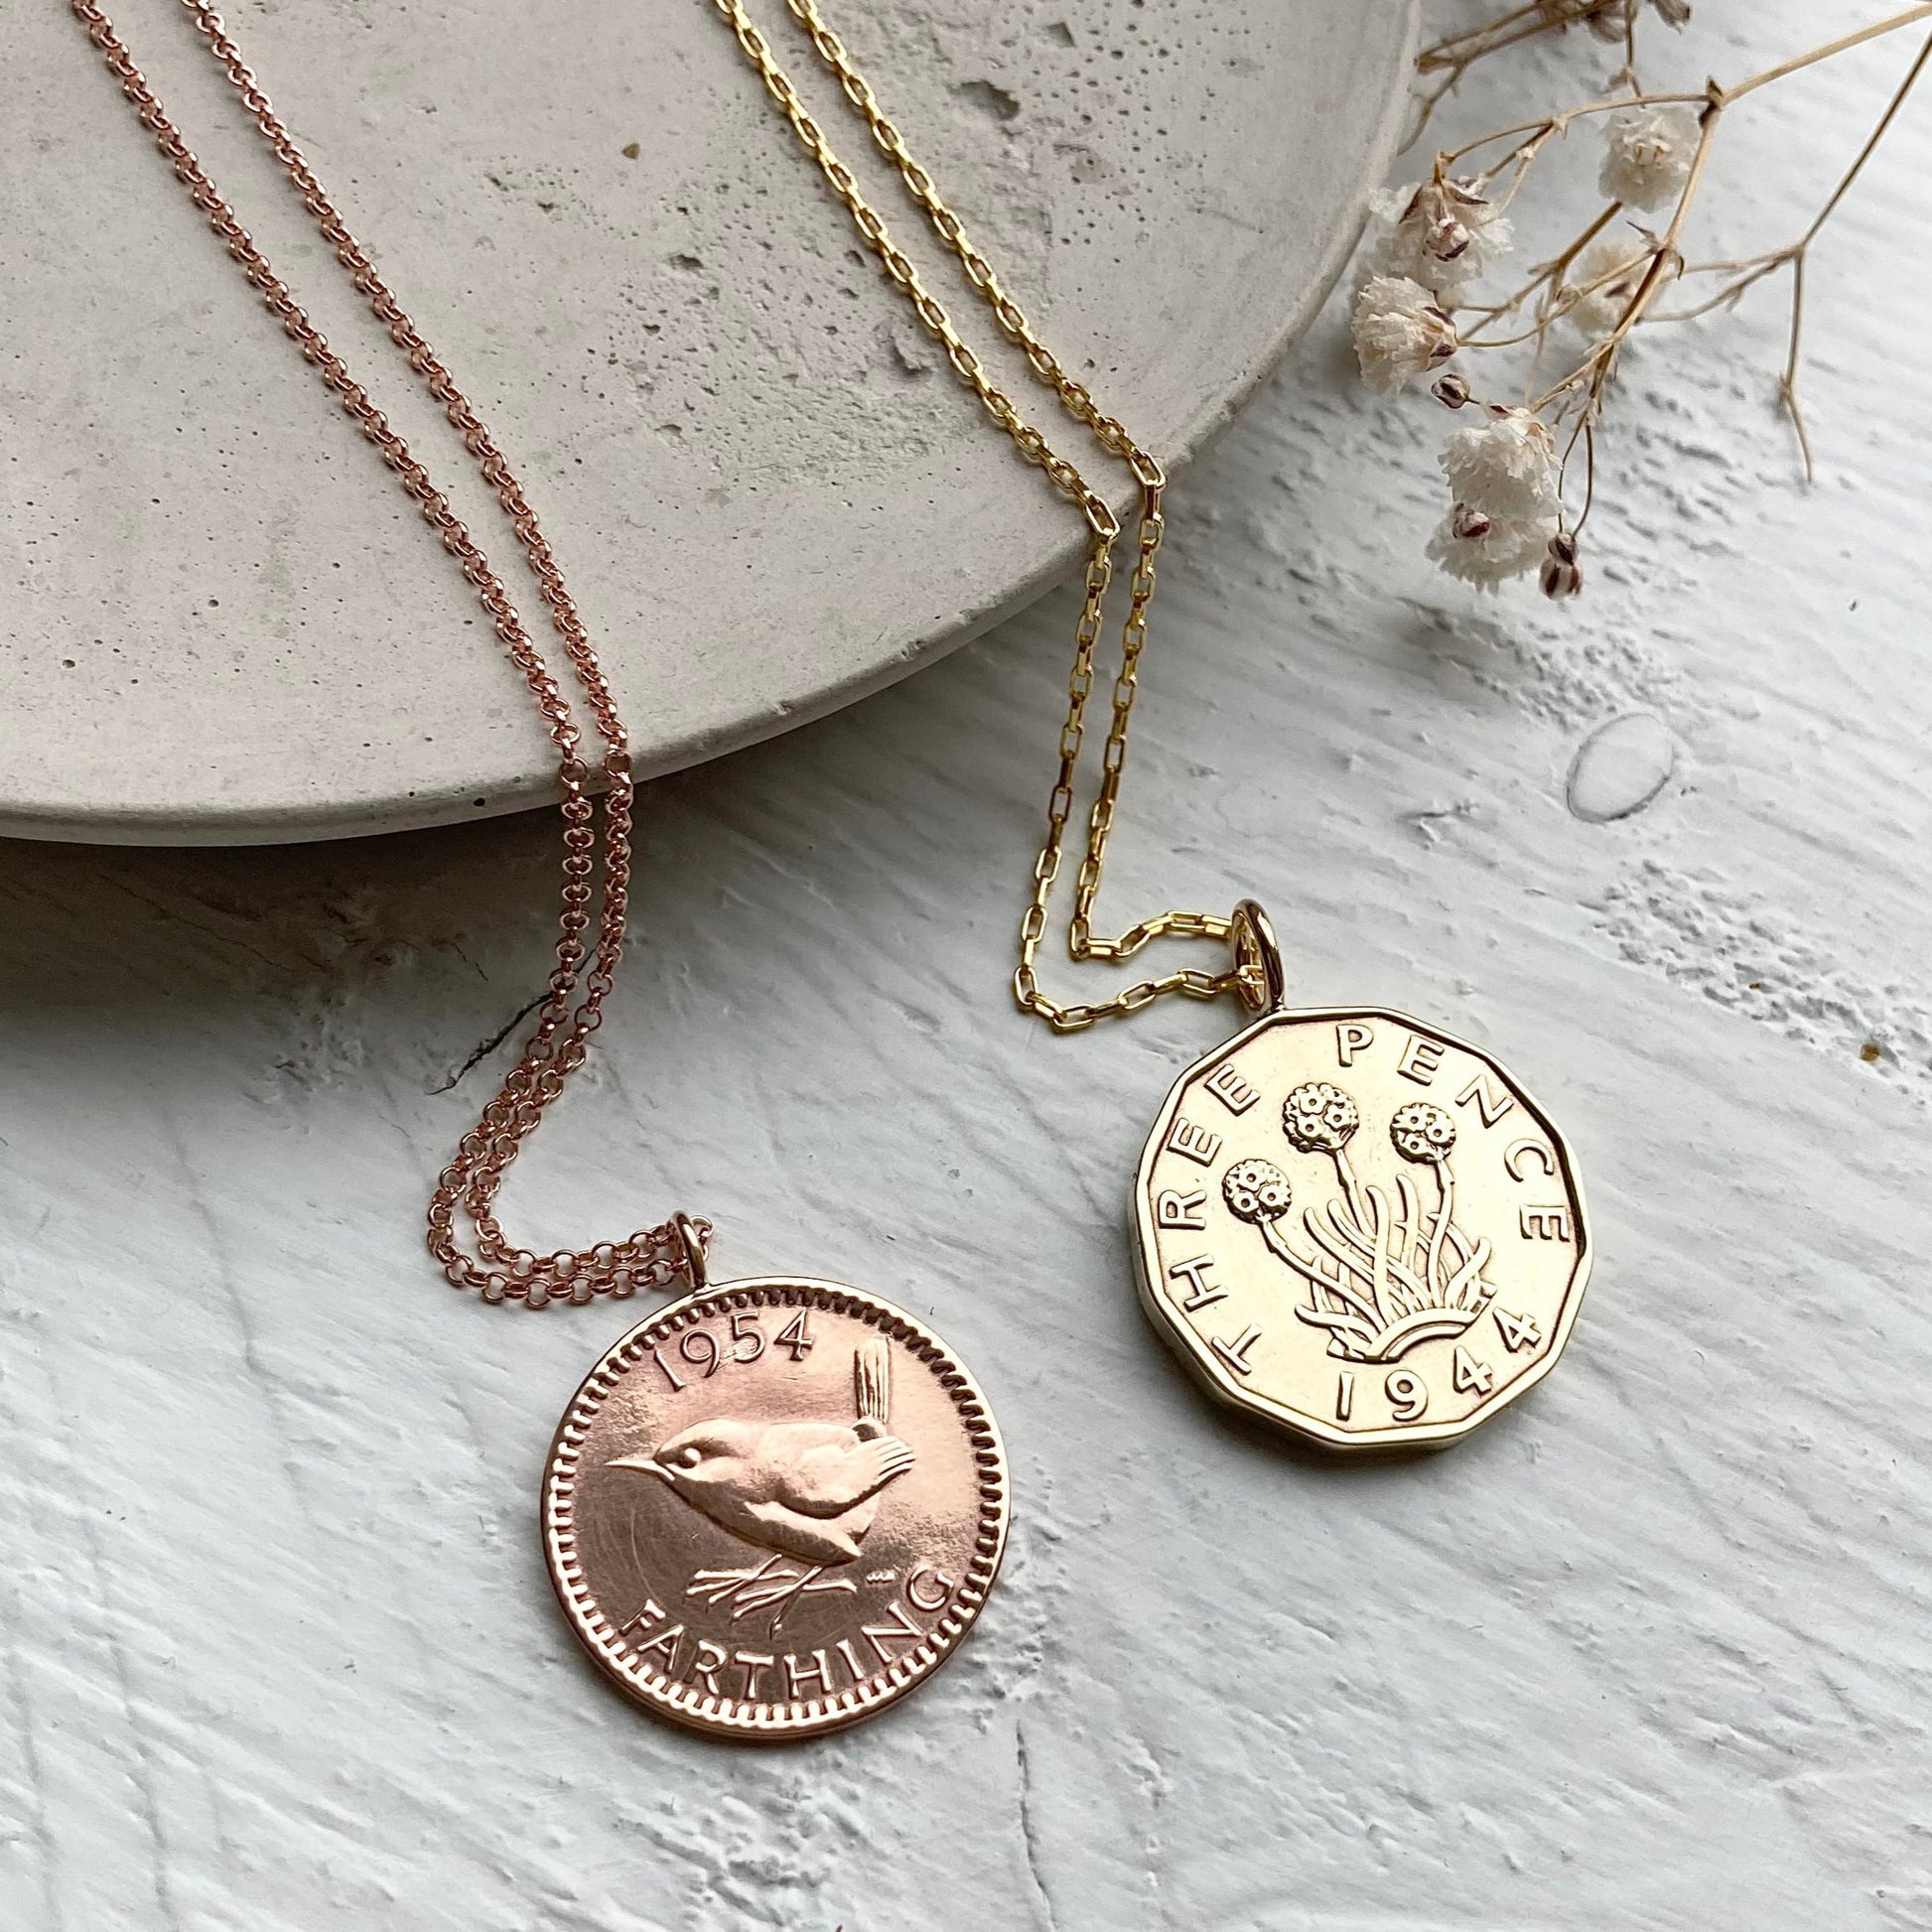 Buy Prenoa coin necklaces, pendants, earrings and coin accessory gifts for men and women